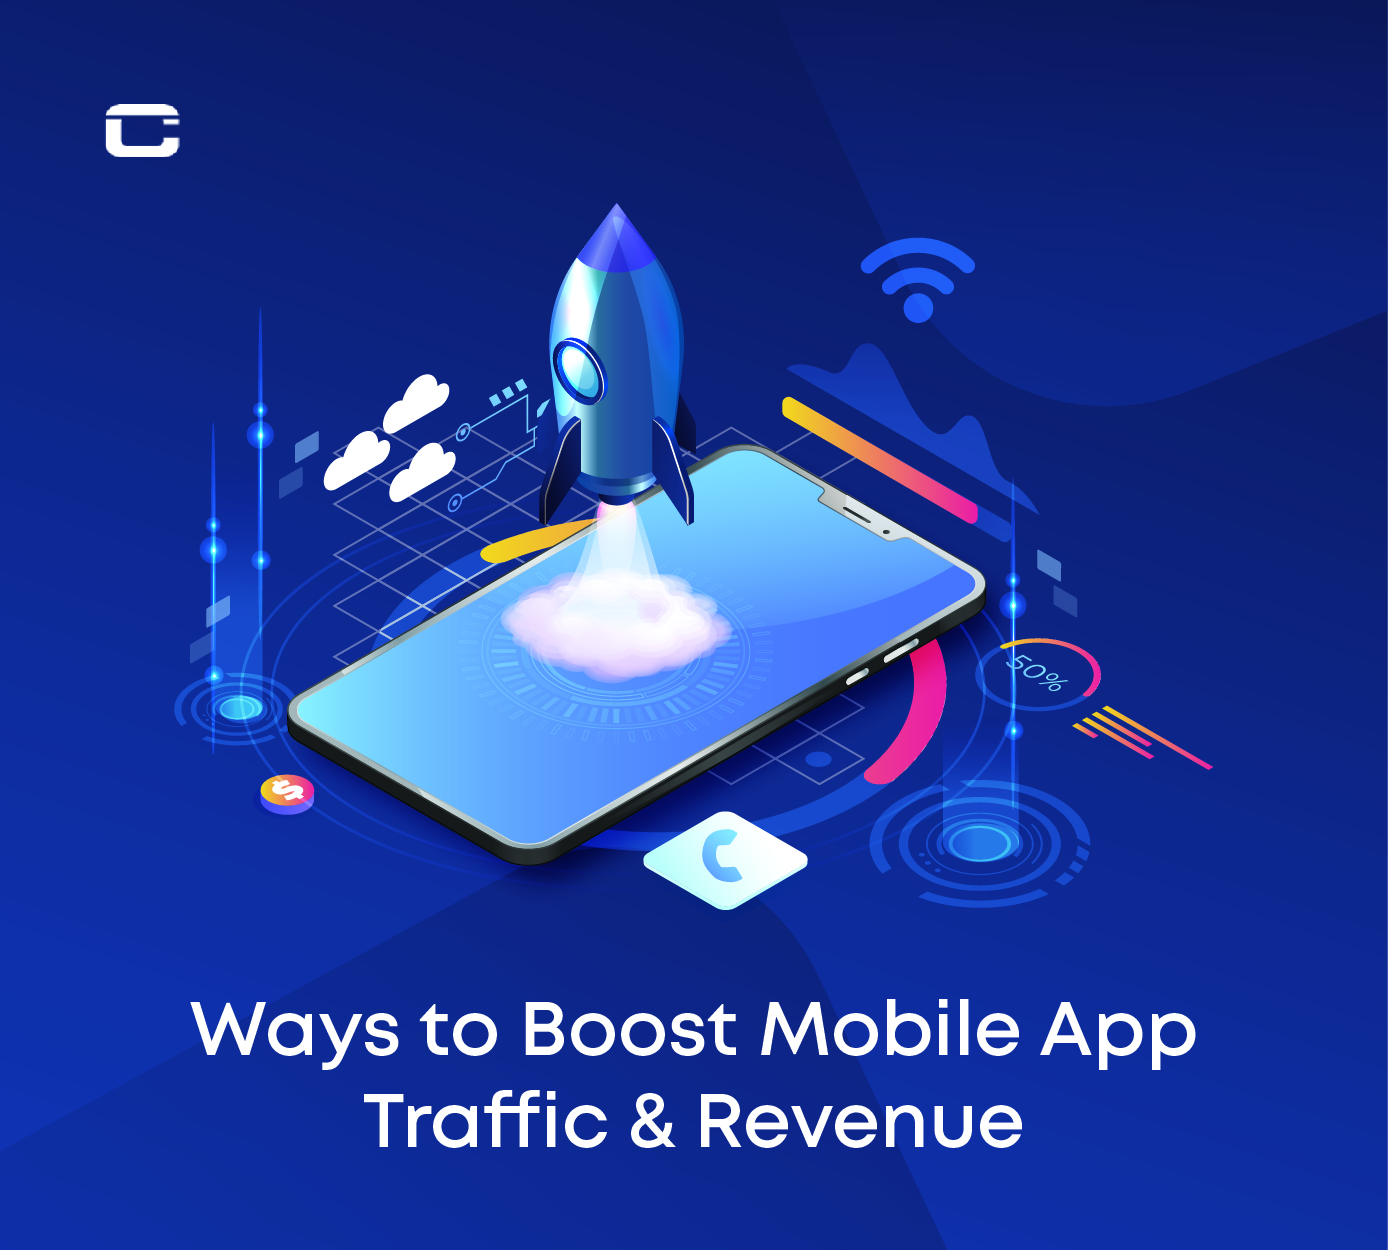 Ways to Boost Mobile App Traffic & Revenue